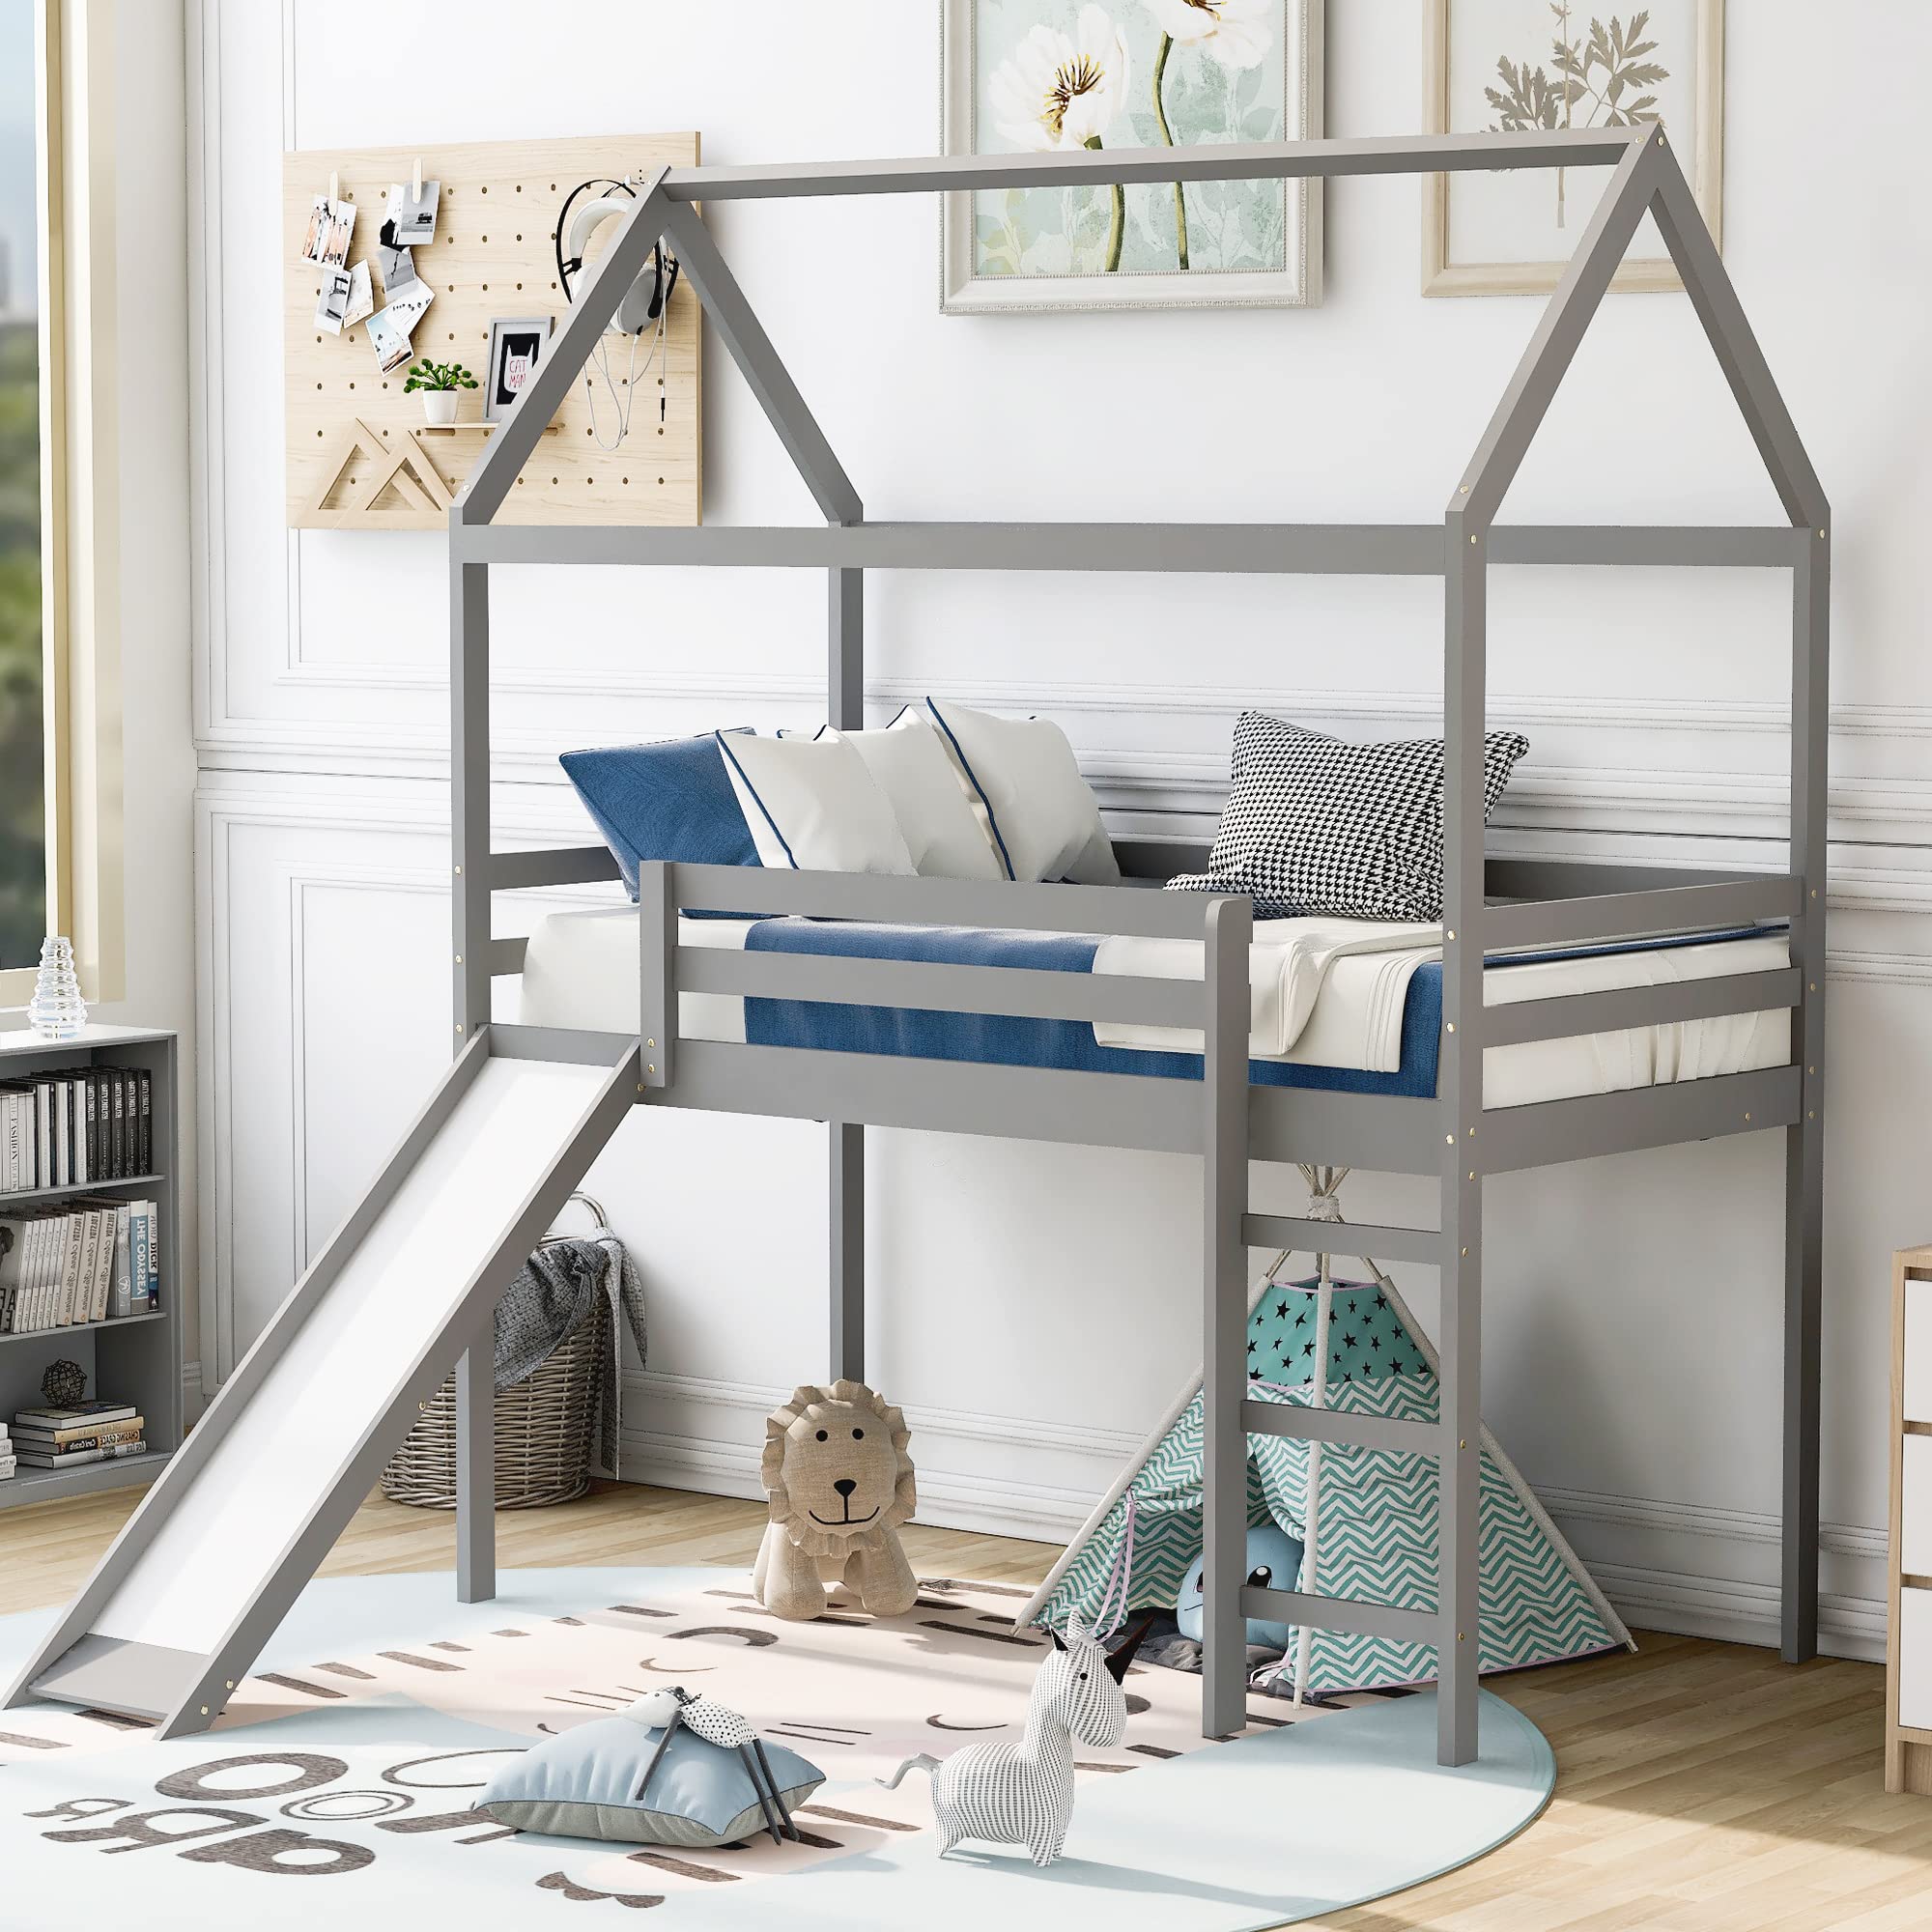 Lostcat Twin Size Loft Bed with Slide, House Shaped Solid Pine Wood Bed Frame w/Safety Guardrail & Ladder, No Box Spring Needed, Save Space Design for Kids, Teens, Girls, Boys, Grey